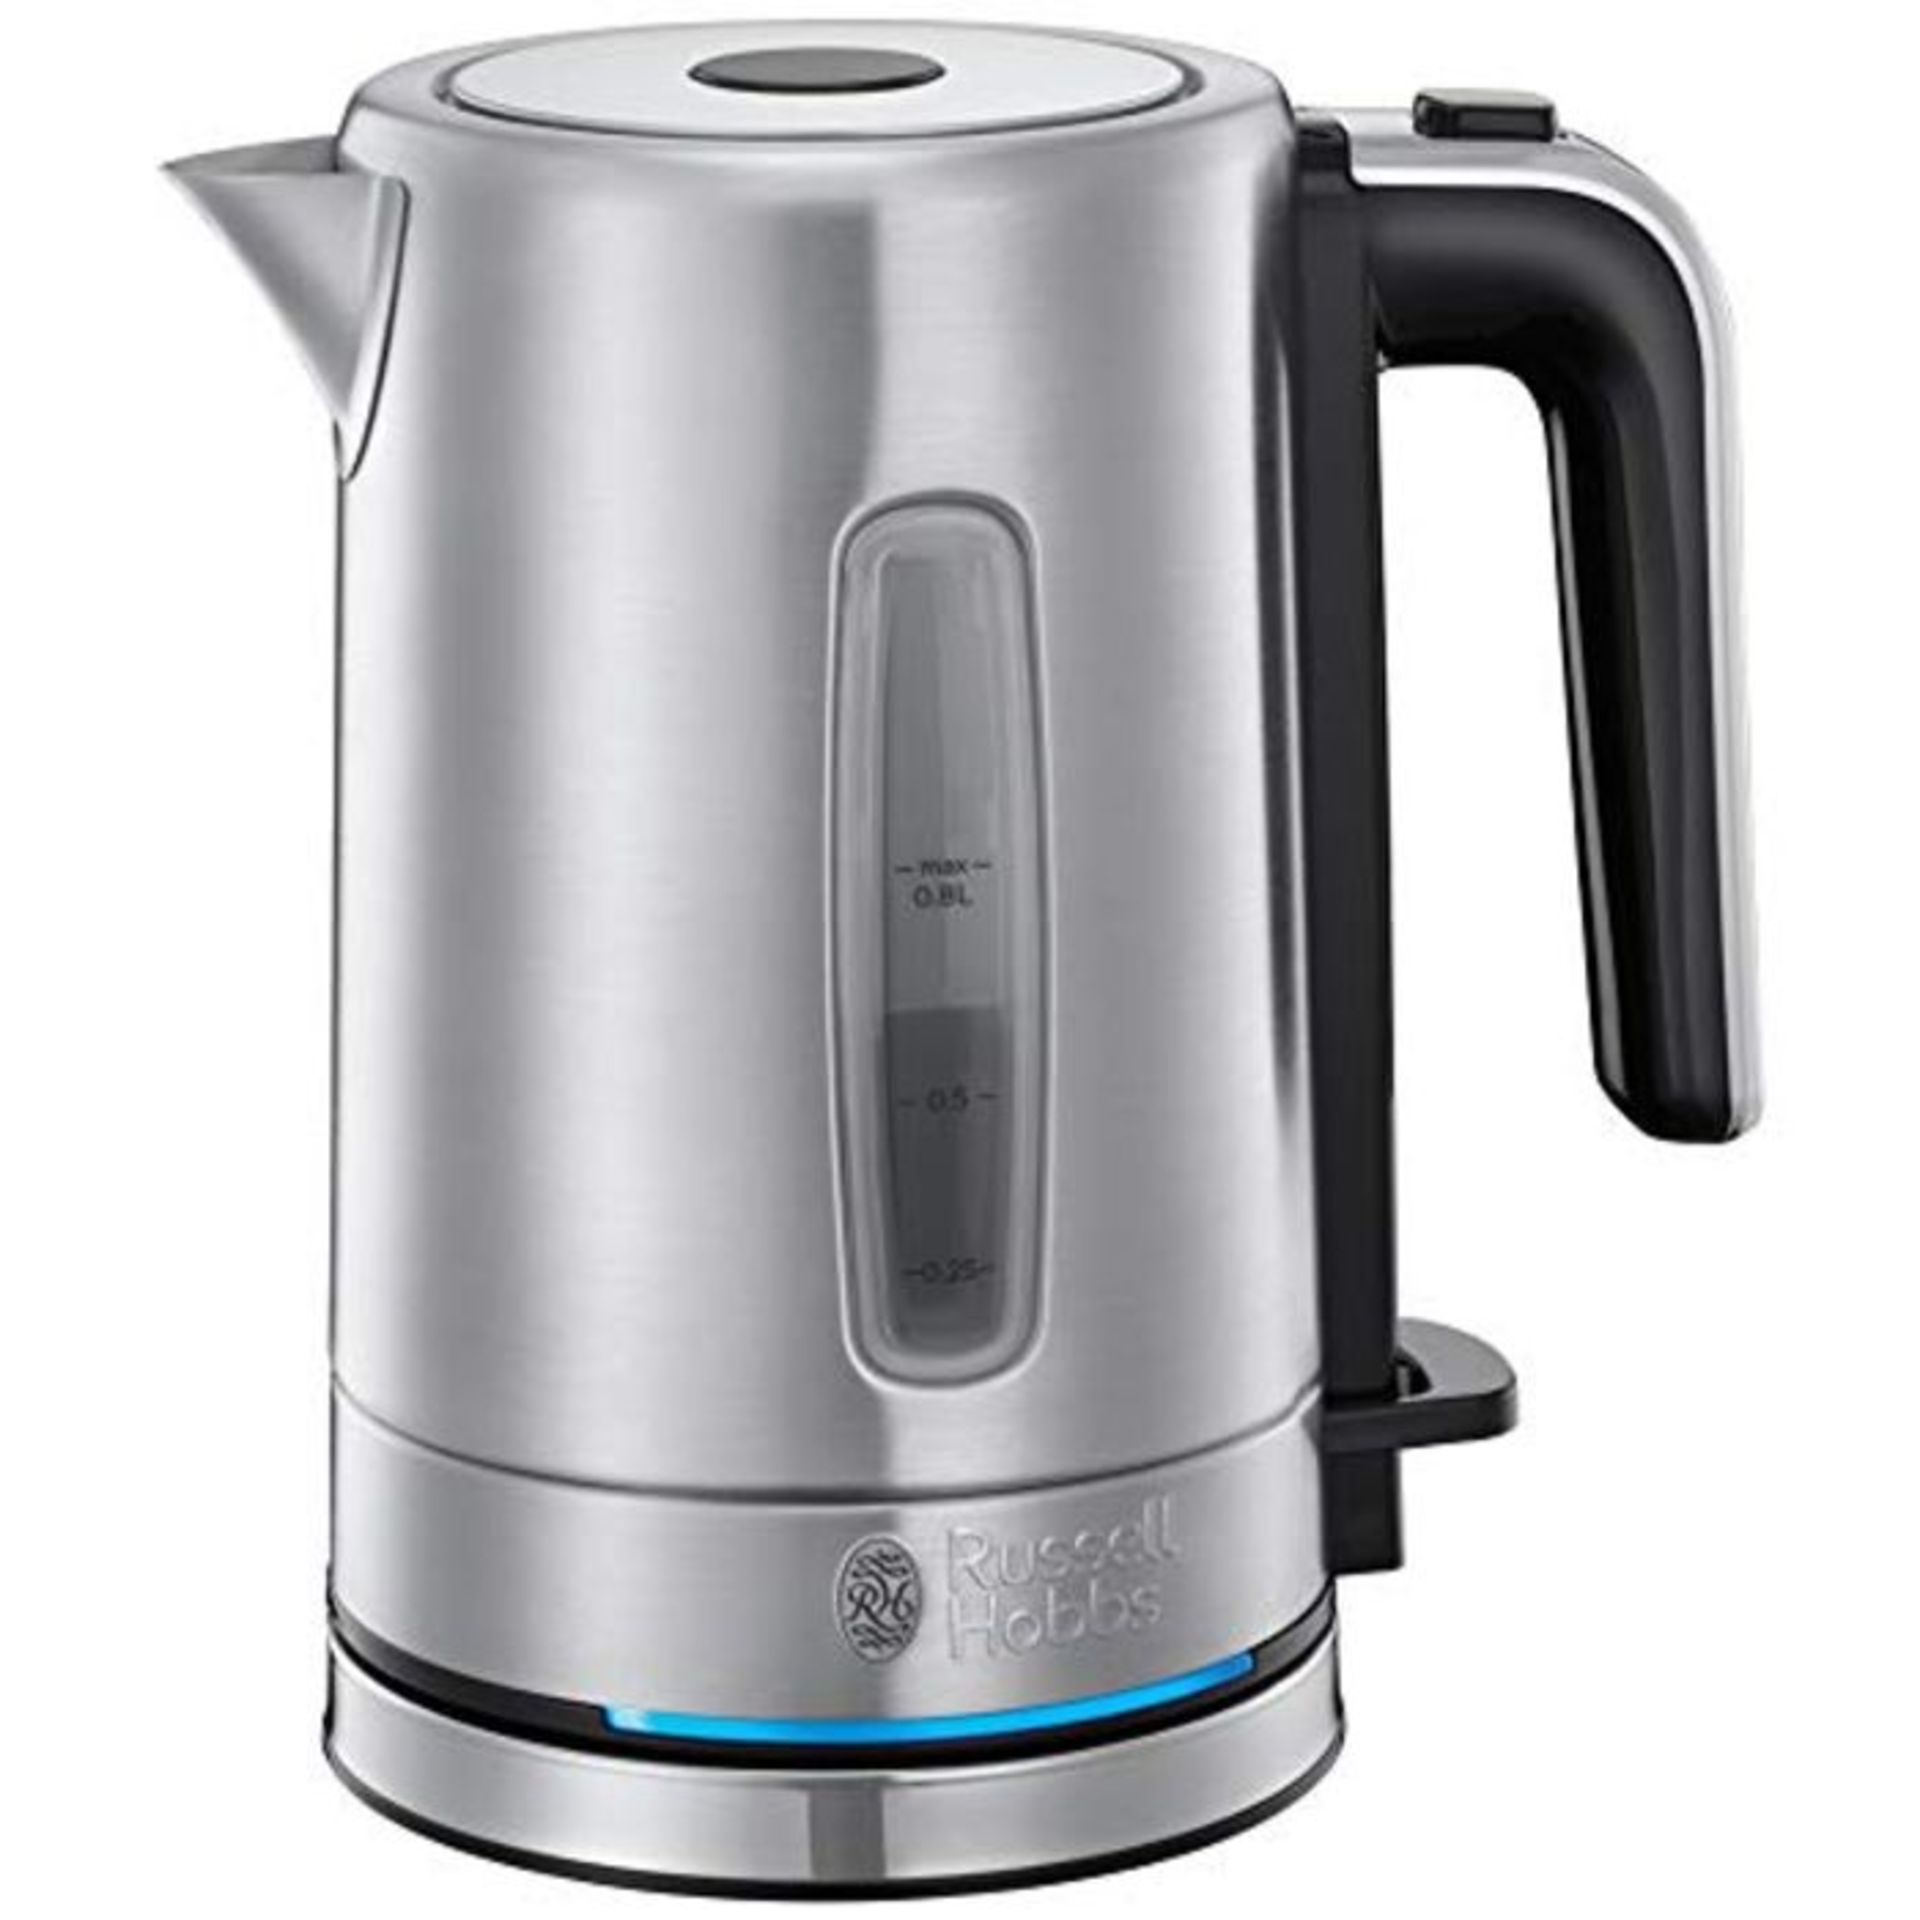 Russell Hobbs 24190-70 Cordless Kettle, 2200 W, Brushed Steel